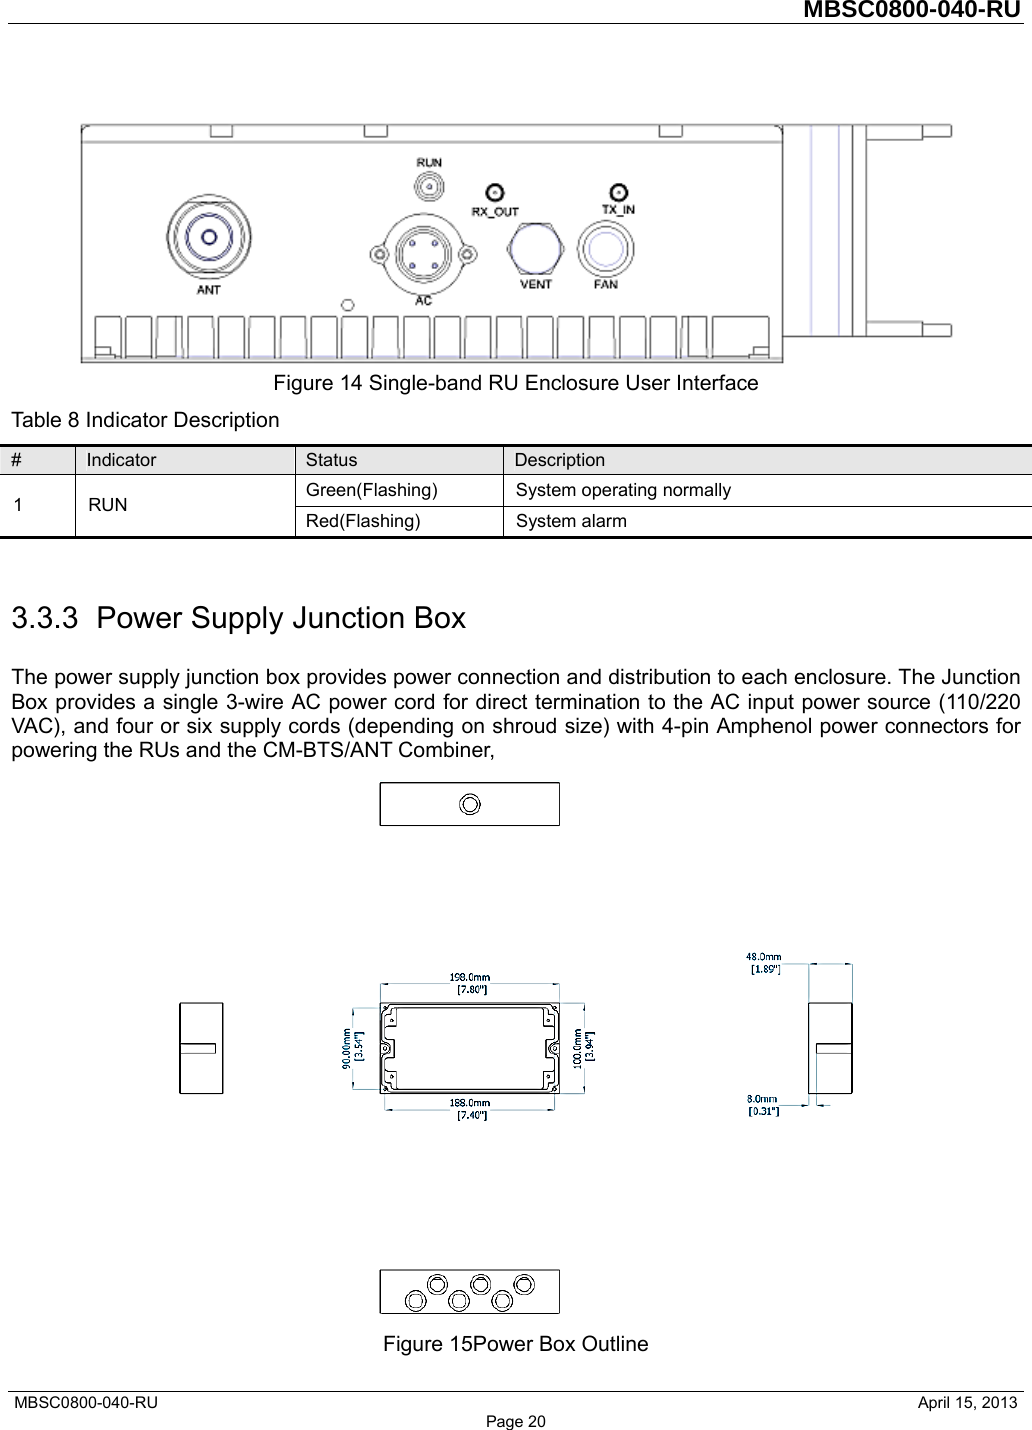         MBSC0800-040-RU   MBSC0800-040-RU                                                   April 15, 2013 Page 20  Figure 14 Single-band RU Enclosure User Interface Table 8 Indicator Description #  Indicator  Status  Description 1 RUN  Green(Flashing)  System operating normally Red(Flashing) System alarm  3.3.3 Power Supply Junction Box The power supply junction box provides power connection and distribution to each enclosure. The Junction Box provides a single 3-wire AC power cord for direct termination to the AC input power source (110/220 VAC), and four or six supply cords (depending on shroud size) with 4-pin Amphenol power connectors for powering the RUs and the CM-BTS/ANT Combiner,  Figure 15Power Box Outline 